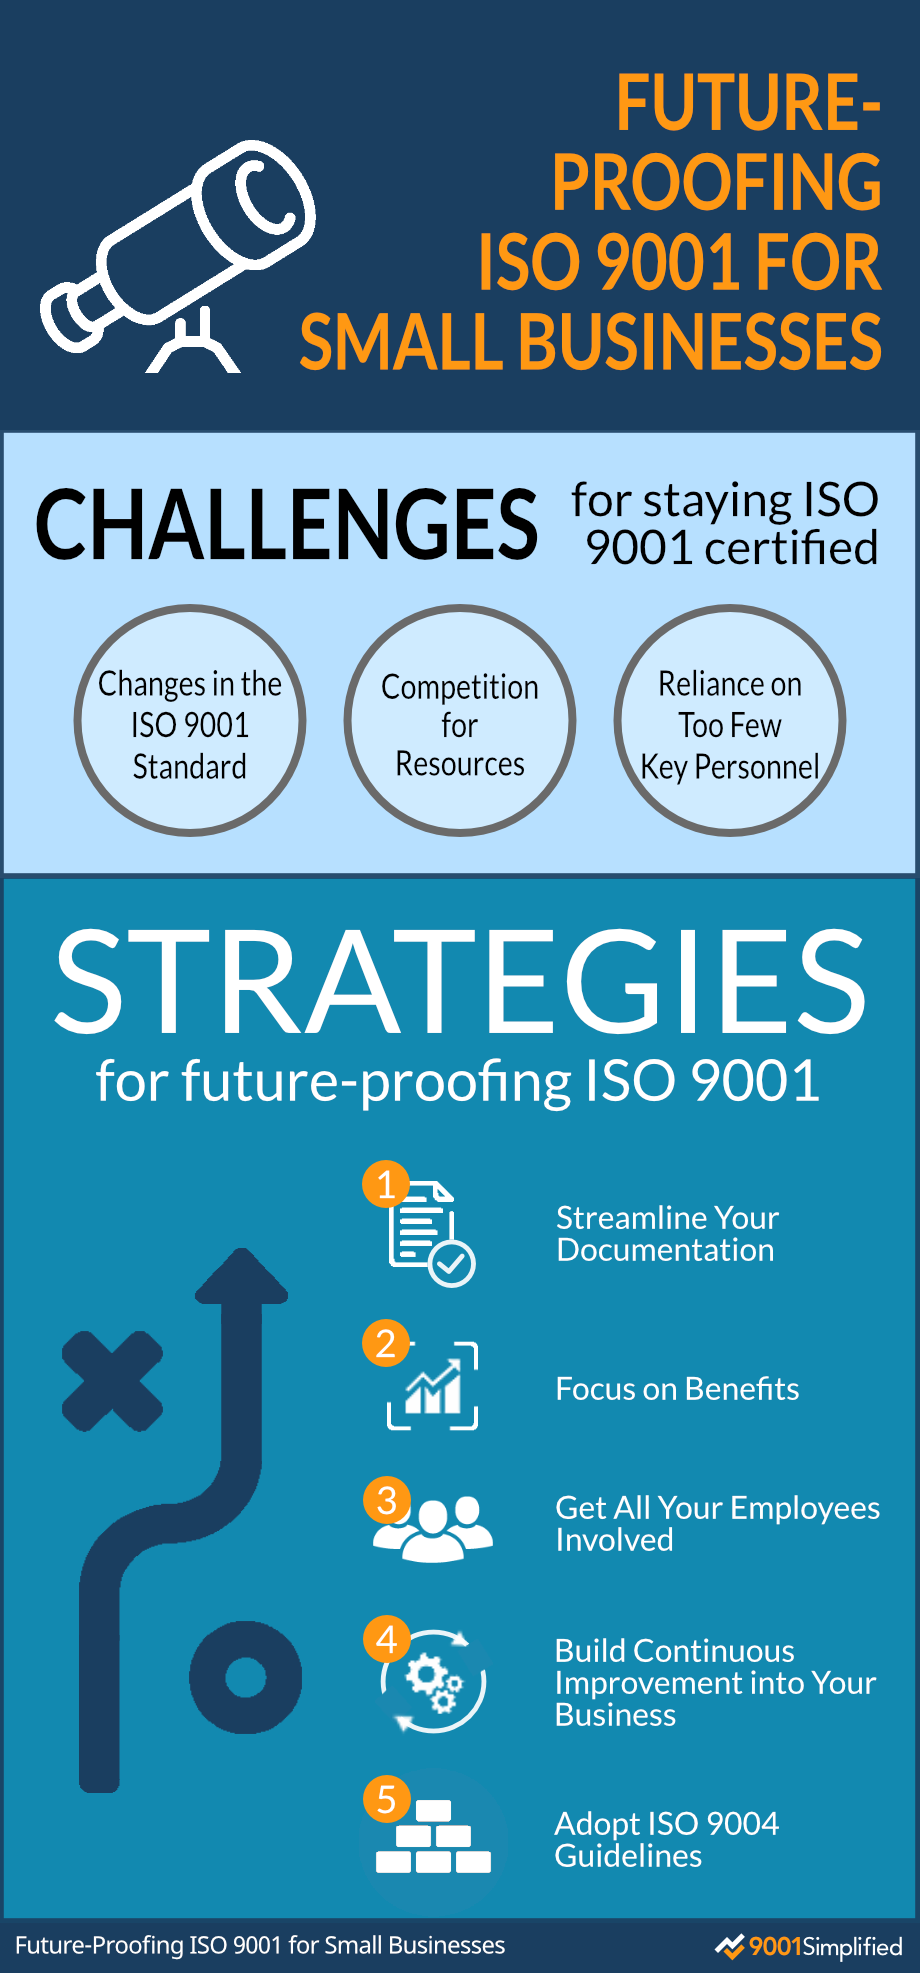 Strategies for Future-Proofing ISO 9001 for Small Businesses